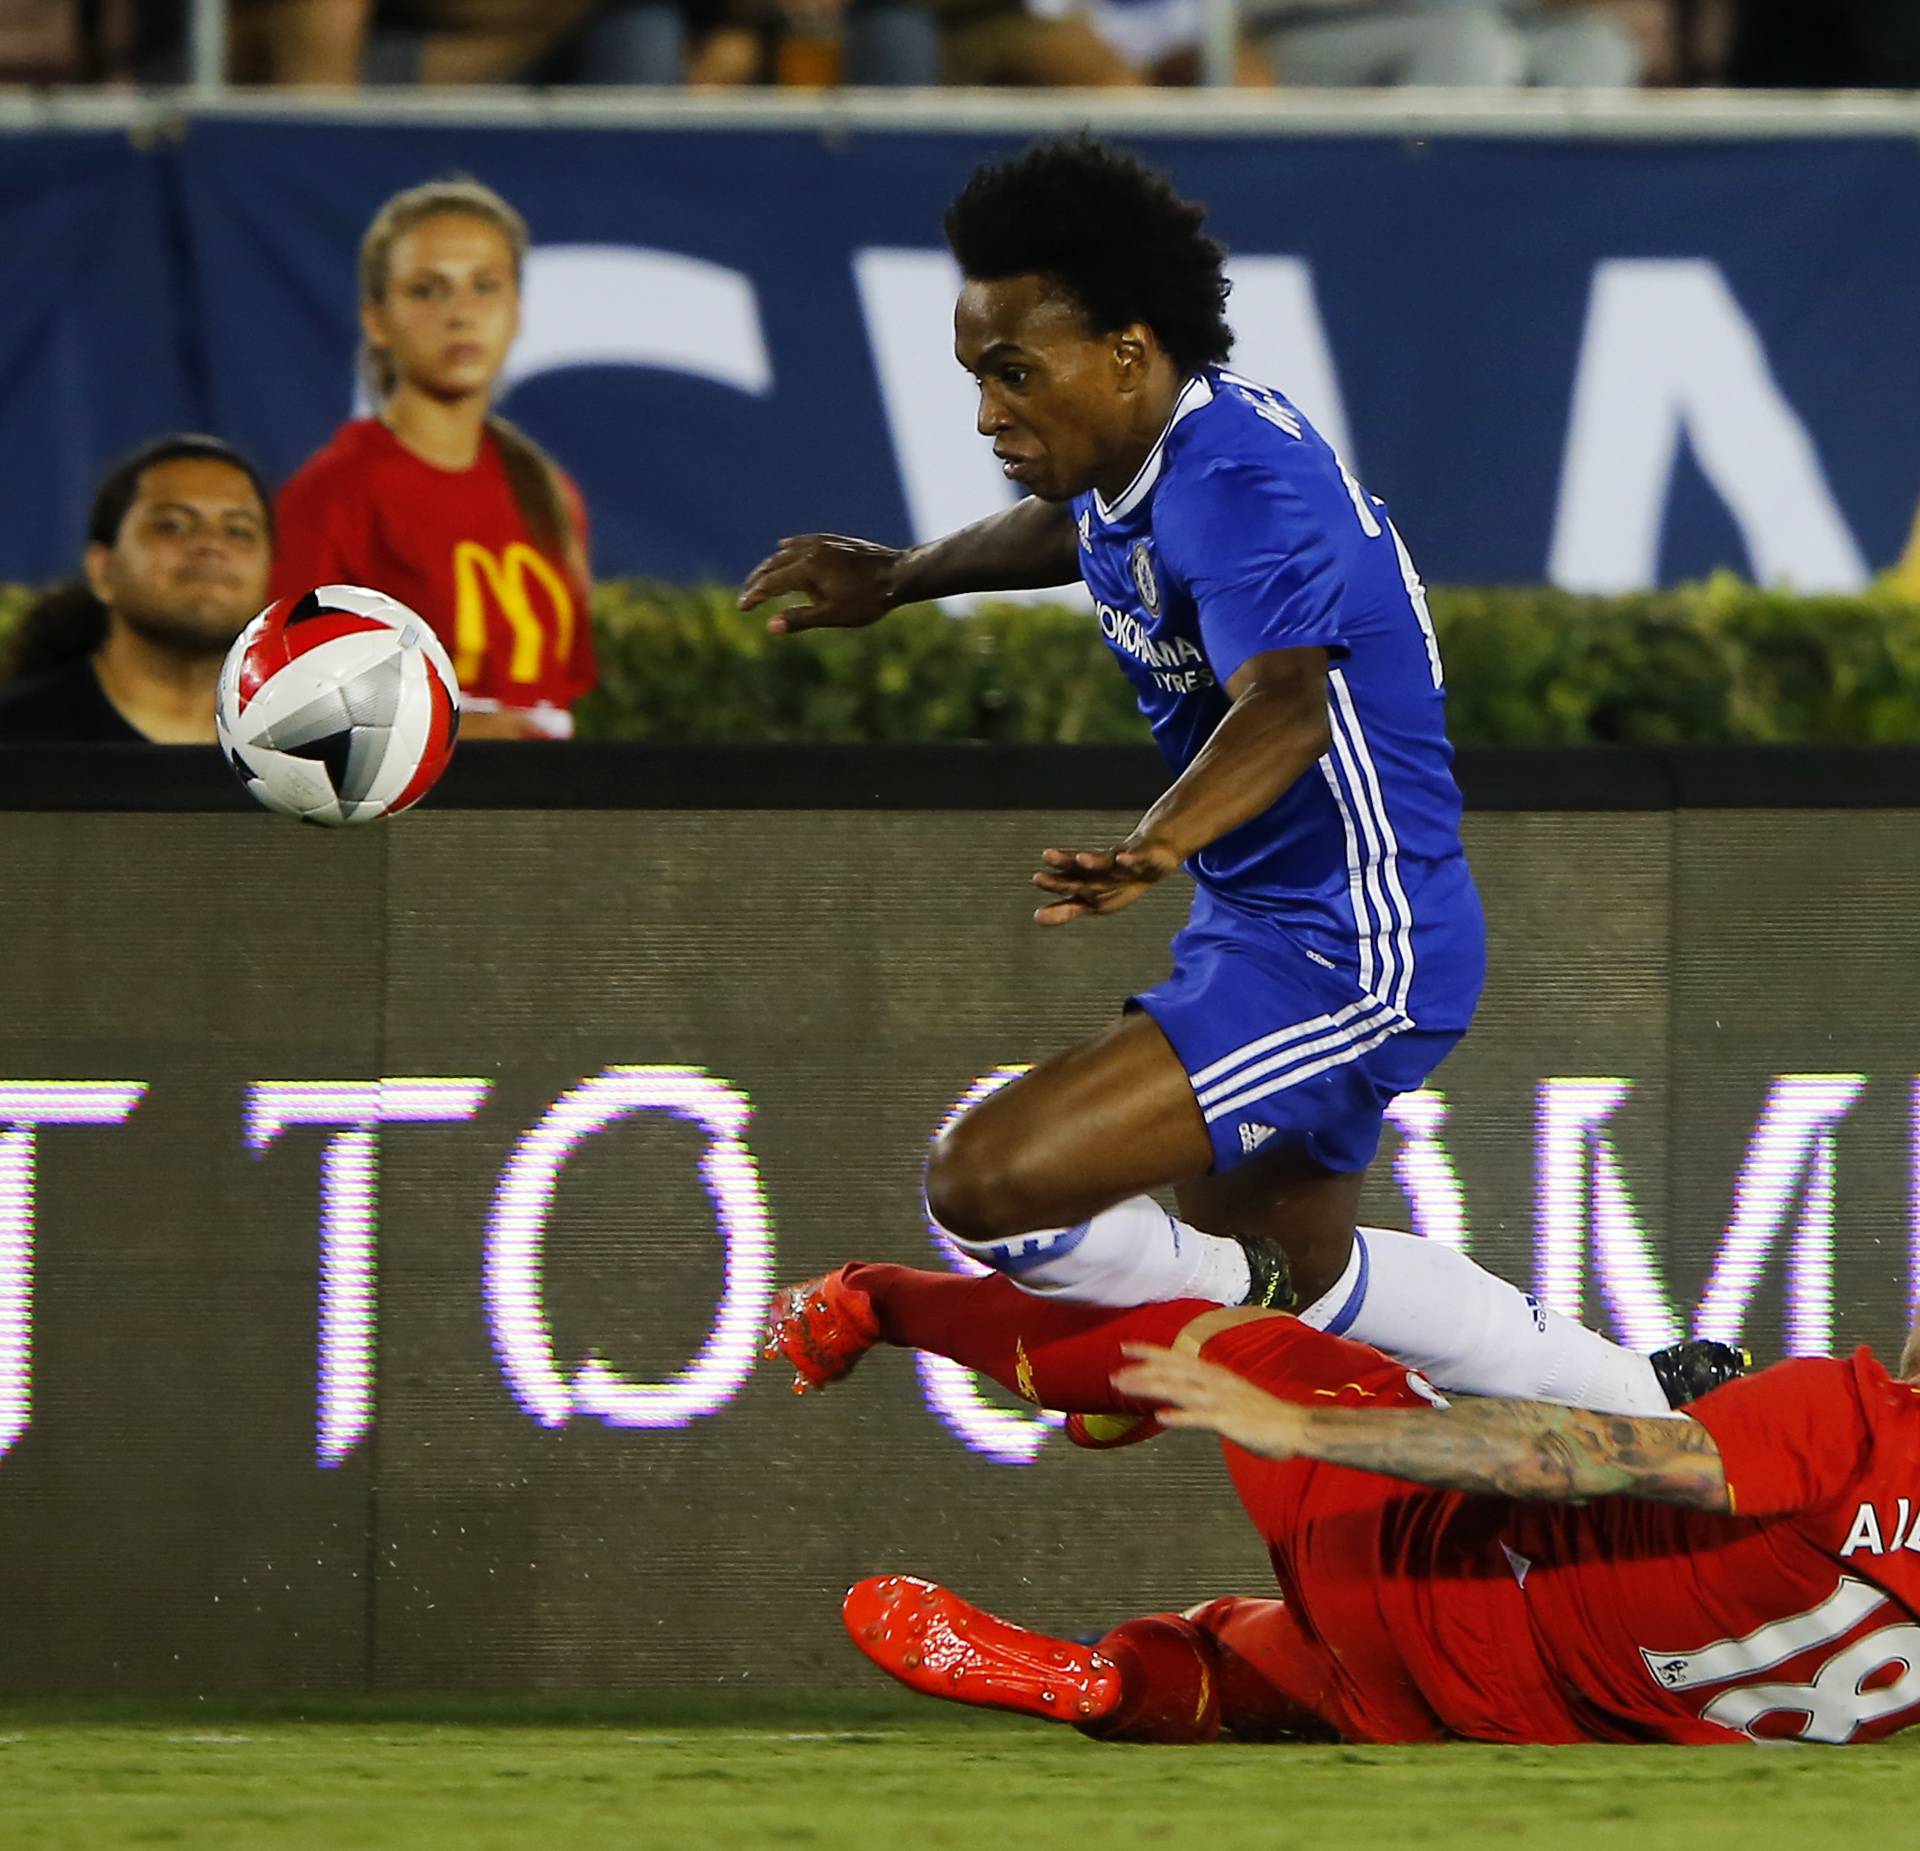 Liverpool v Chelsea - International Champions Cup